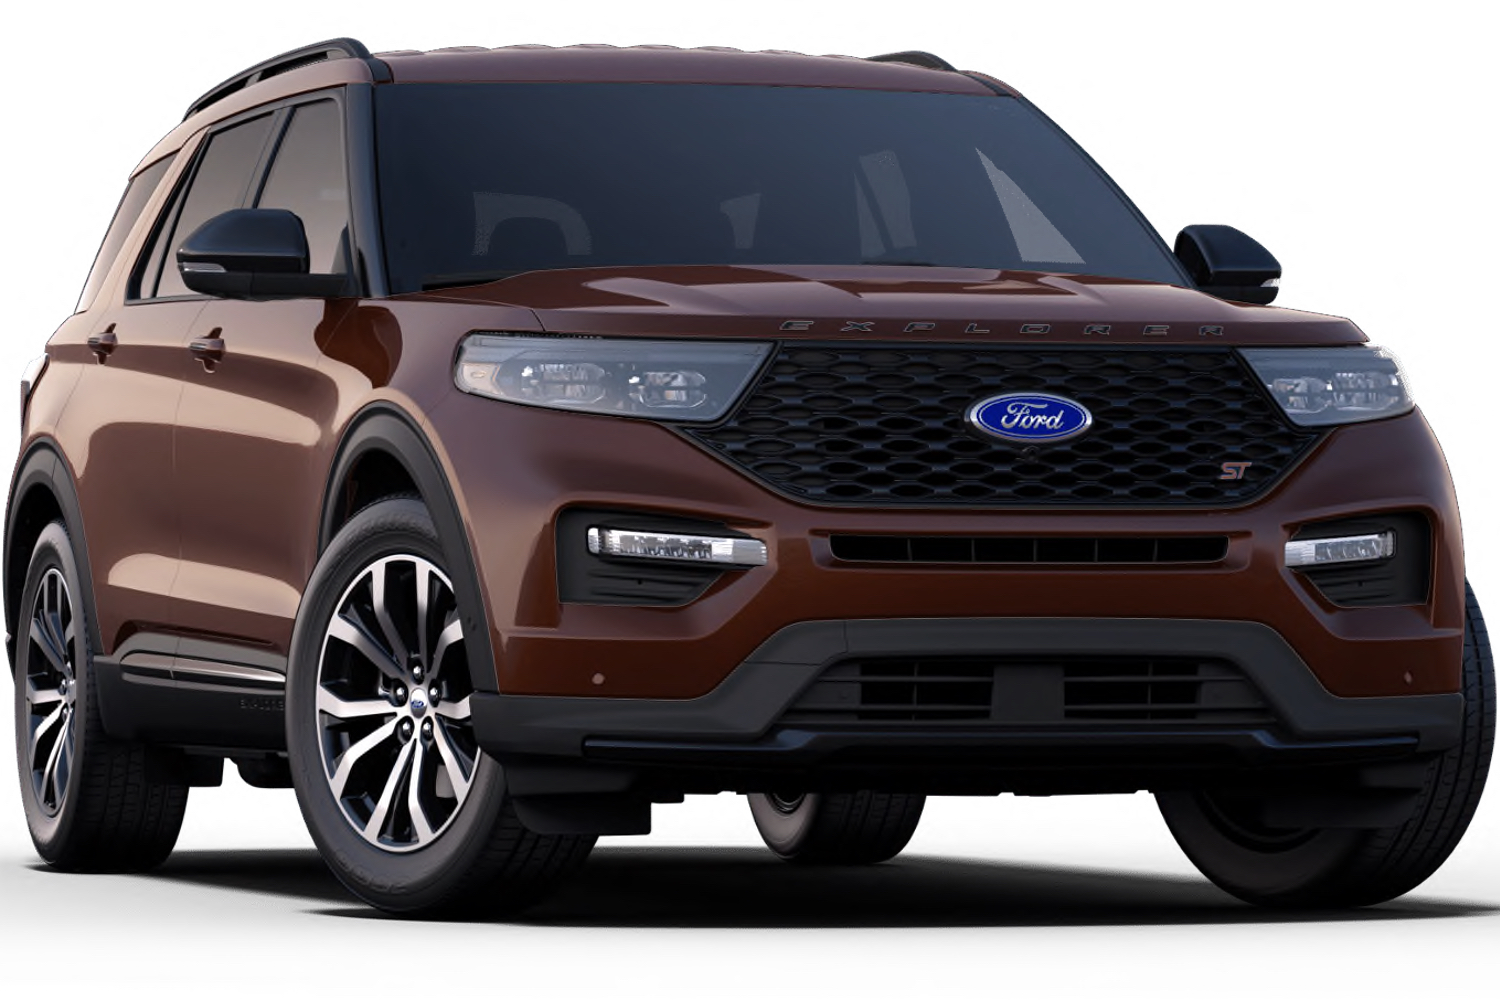 2020 Ford Explorer Gets New Rich Copper Color First Look